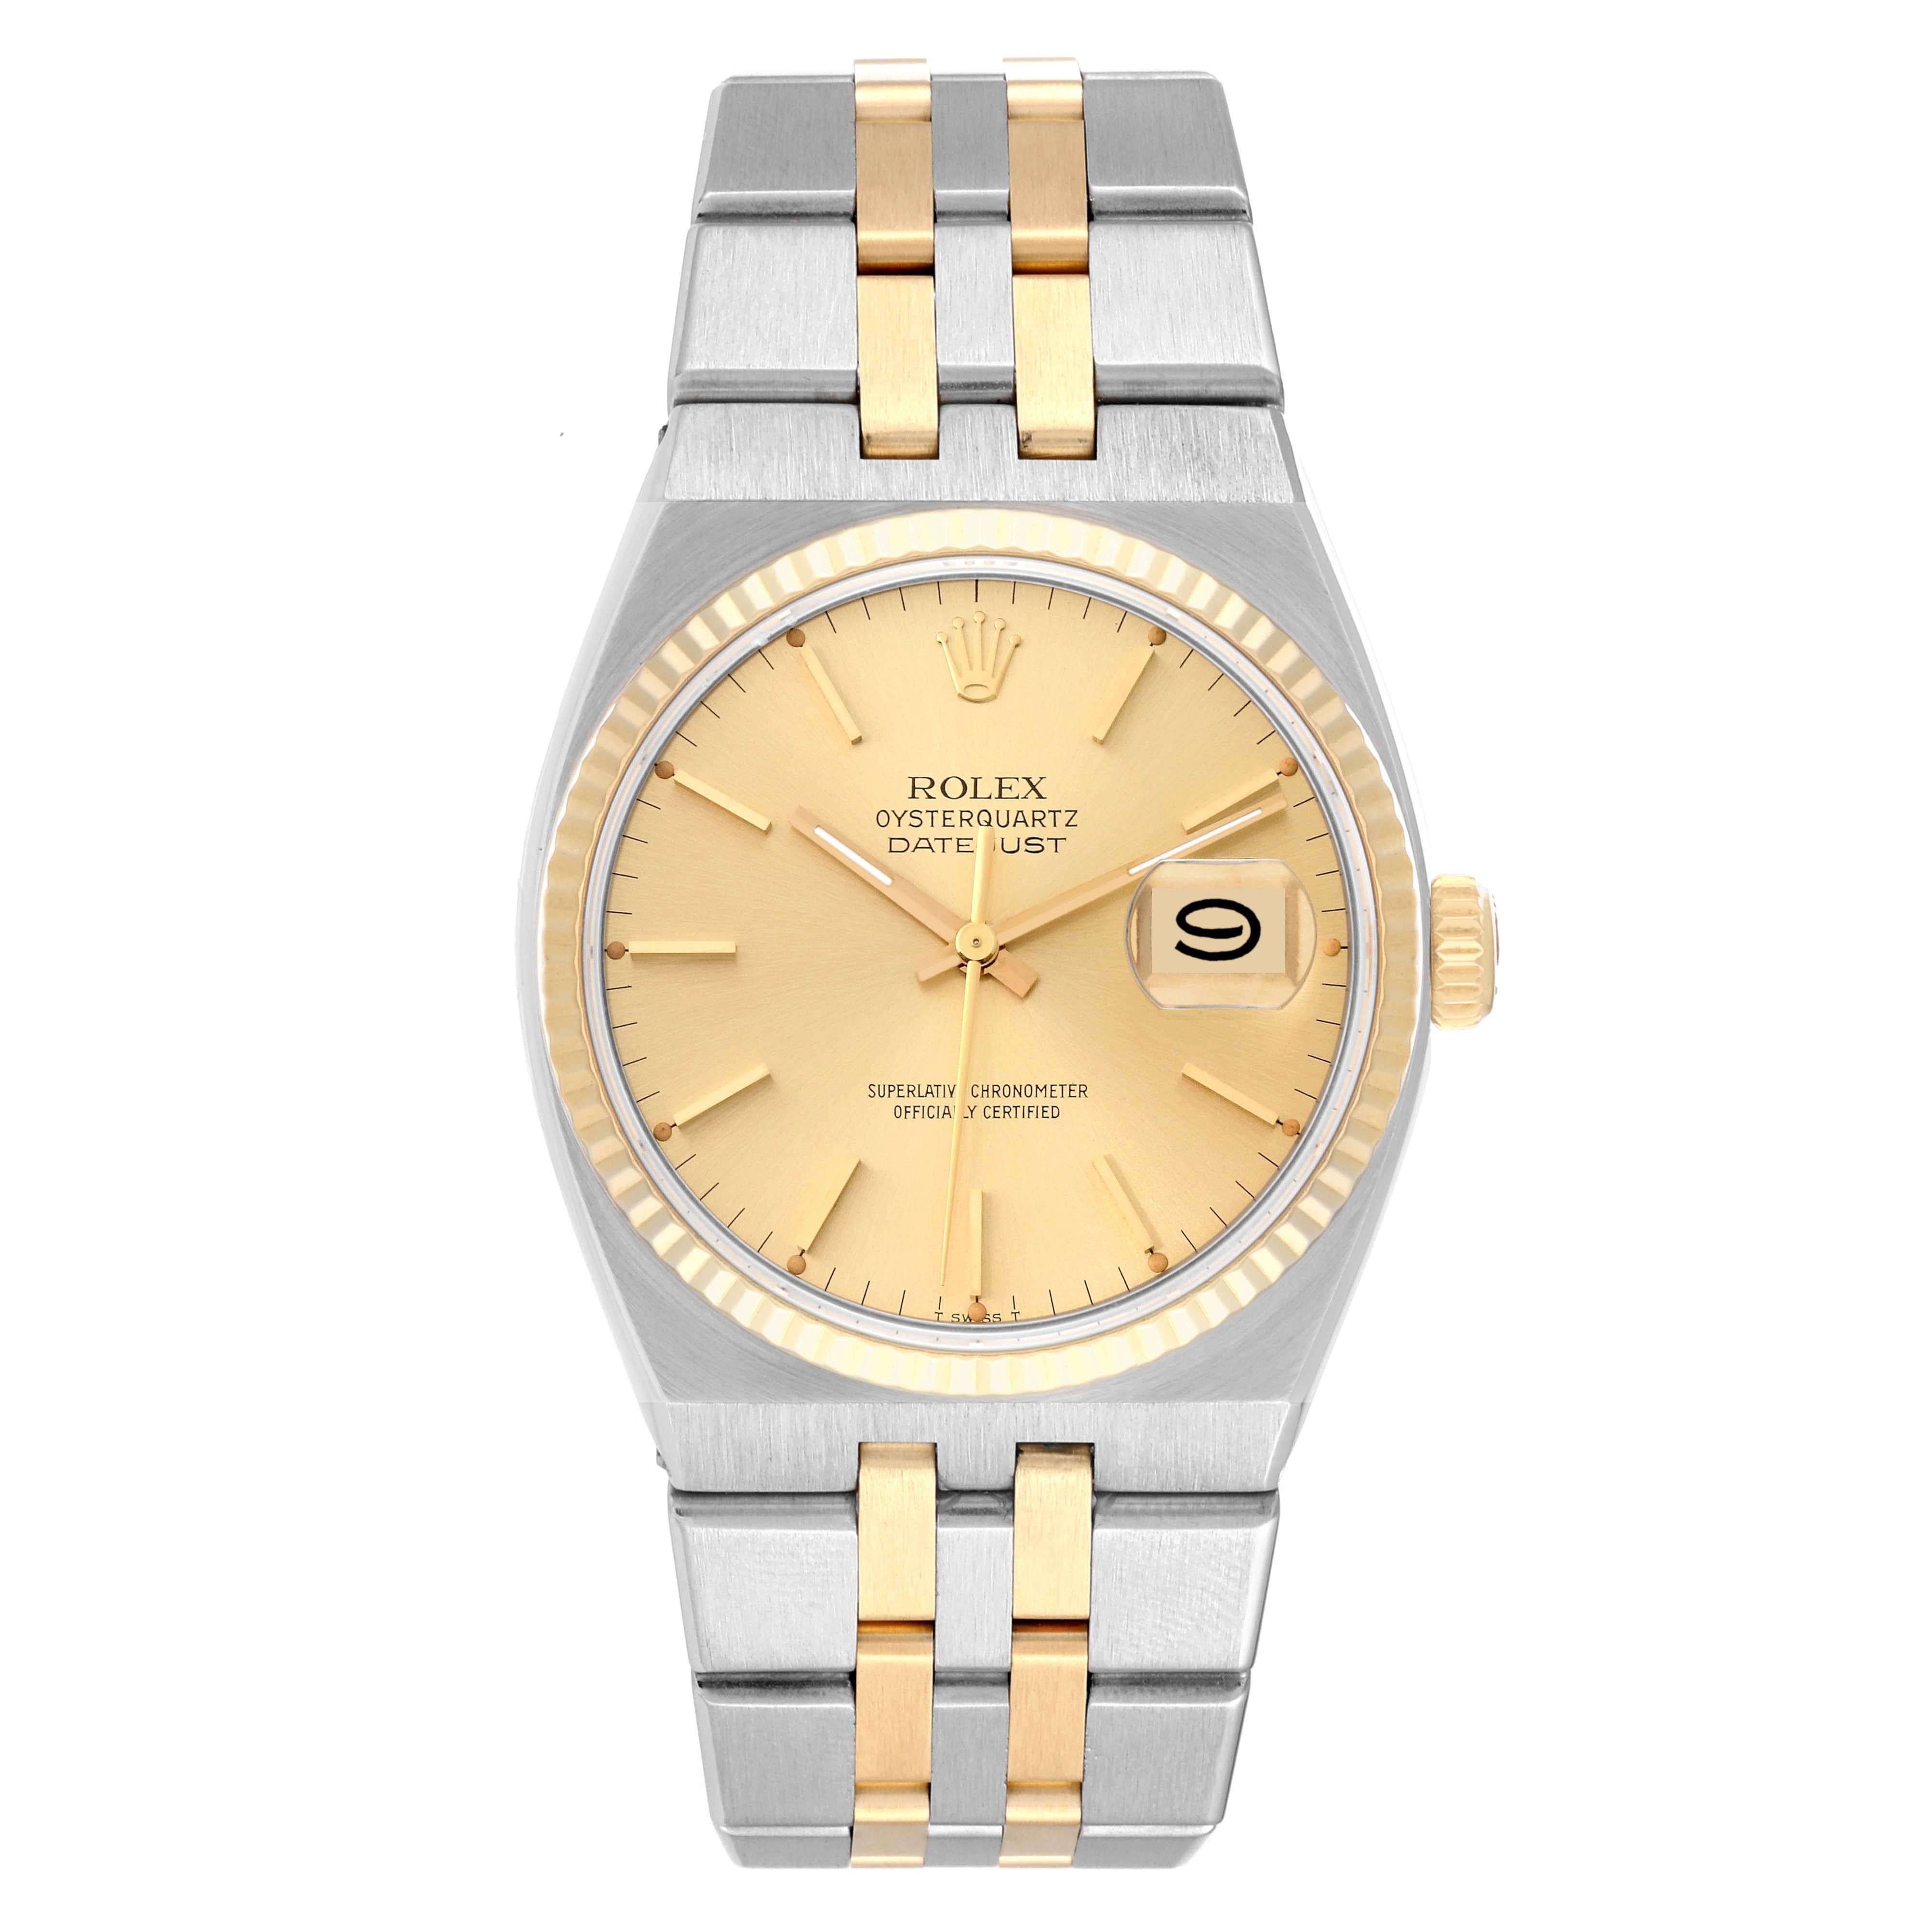 Rolex Oysterquartz Datejust Steel Yellow Gold Mens Watch 17013. Quartz movement. Stainless steel oyster case 36 mm in diameter. Rolex logo on the crown. 18k yellow gold fluted bezel. Scratch resistant sapphire crystal with cyclops magnifier.